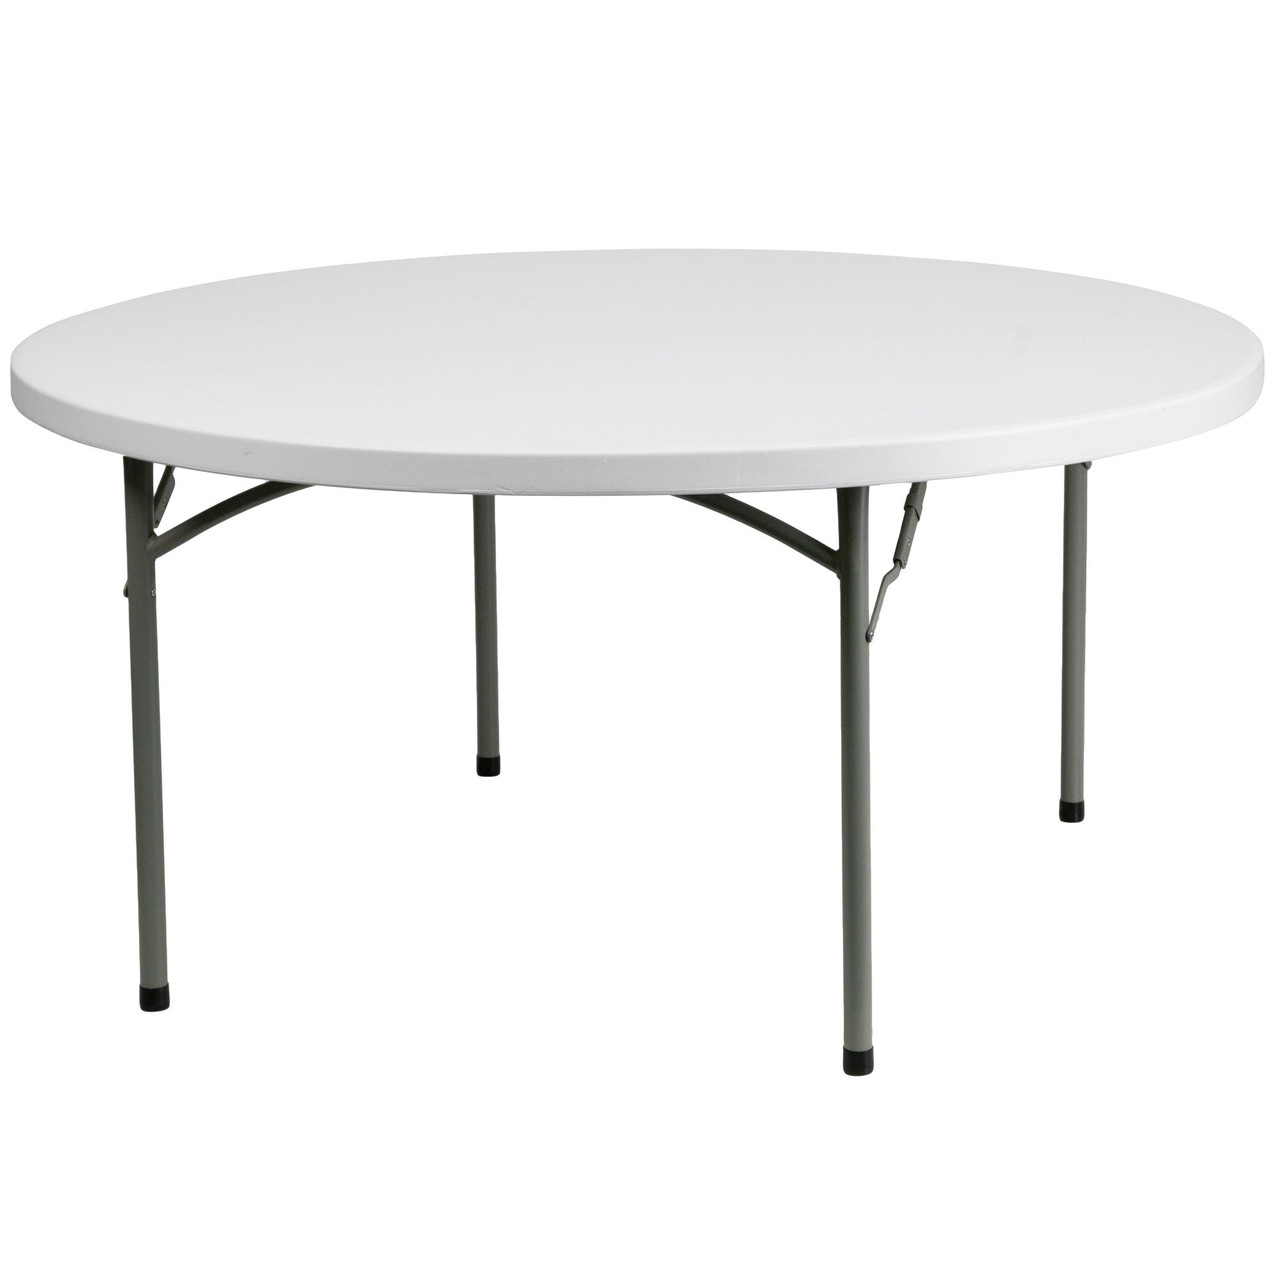 5 Ft Round Plastic Folding Banquet Table Folding Tables